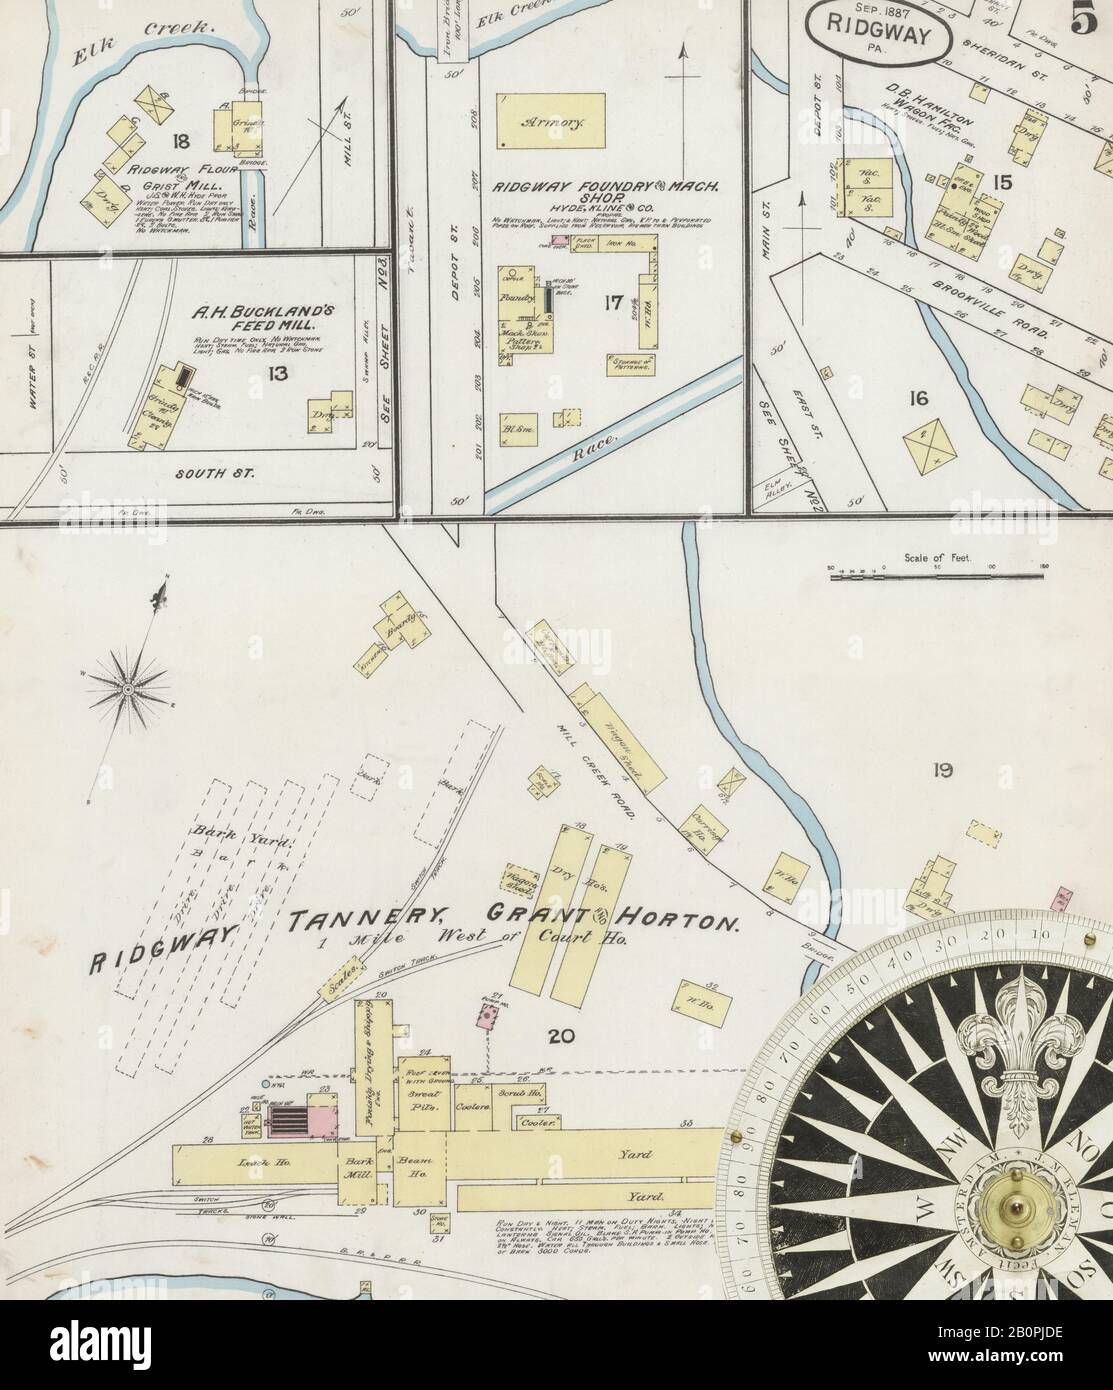 Image 5 of Sanborn Fire Insurance Map from Ridgway, Elk County, Pennsylvania. Sep 1887. 5 Sheet(s), America, street map with a Nineteenth Century compass Stock Photo